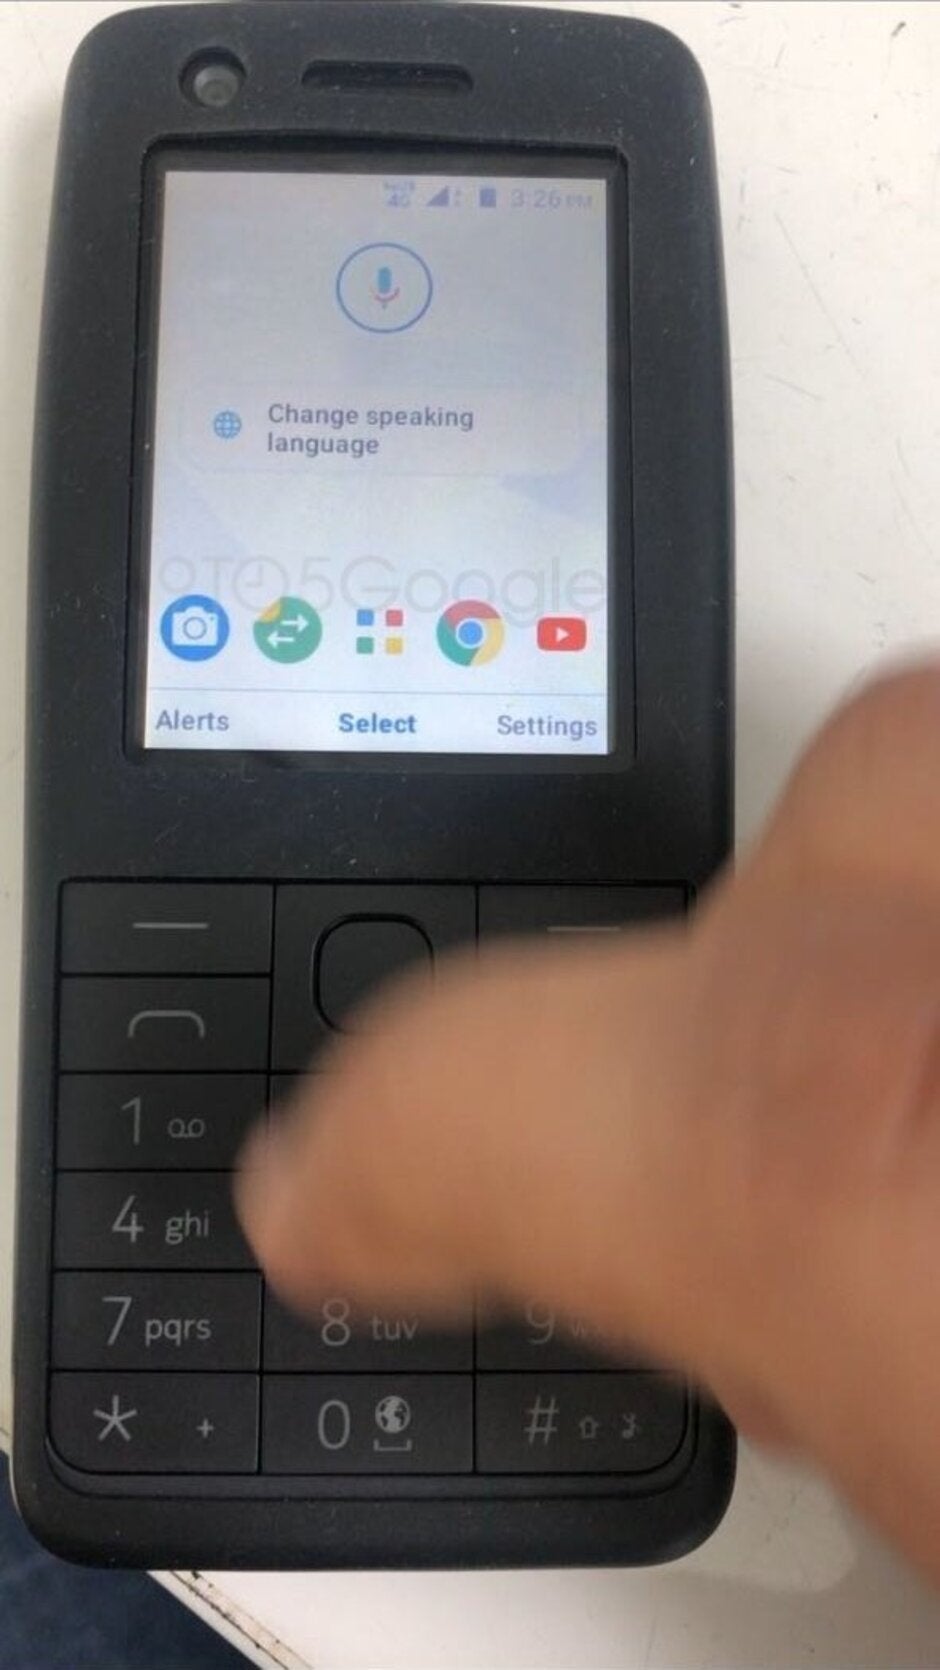 Photo shows feature phone, allegedly from Nokia, running on Android - Leaked photo shows Nokia feature phone running a special version of Android